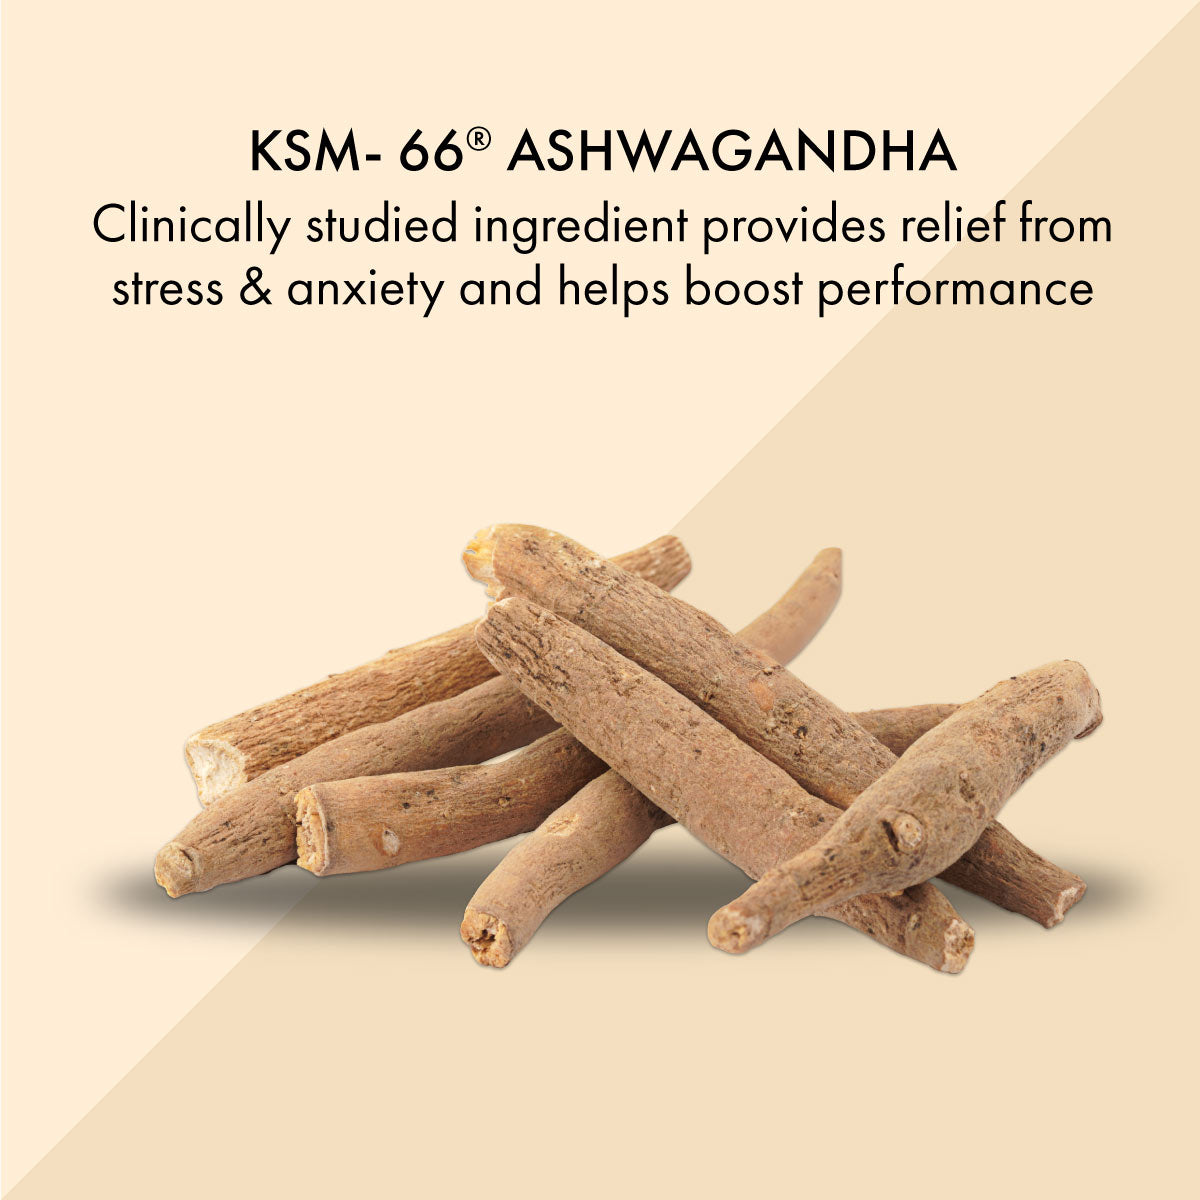 Ashwagandha Effervescent: Discover a Stress-Free You with Clinically Studied KSM- 66® Ashwagandha